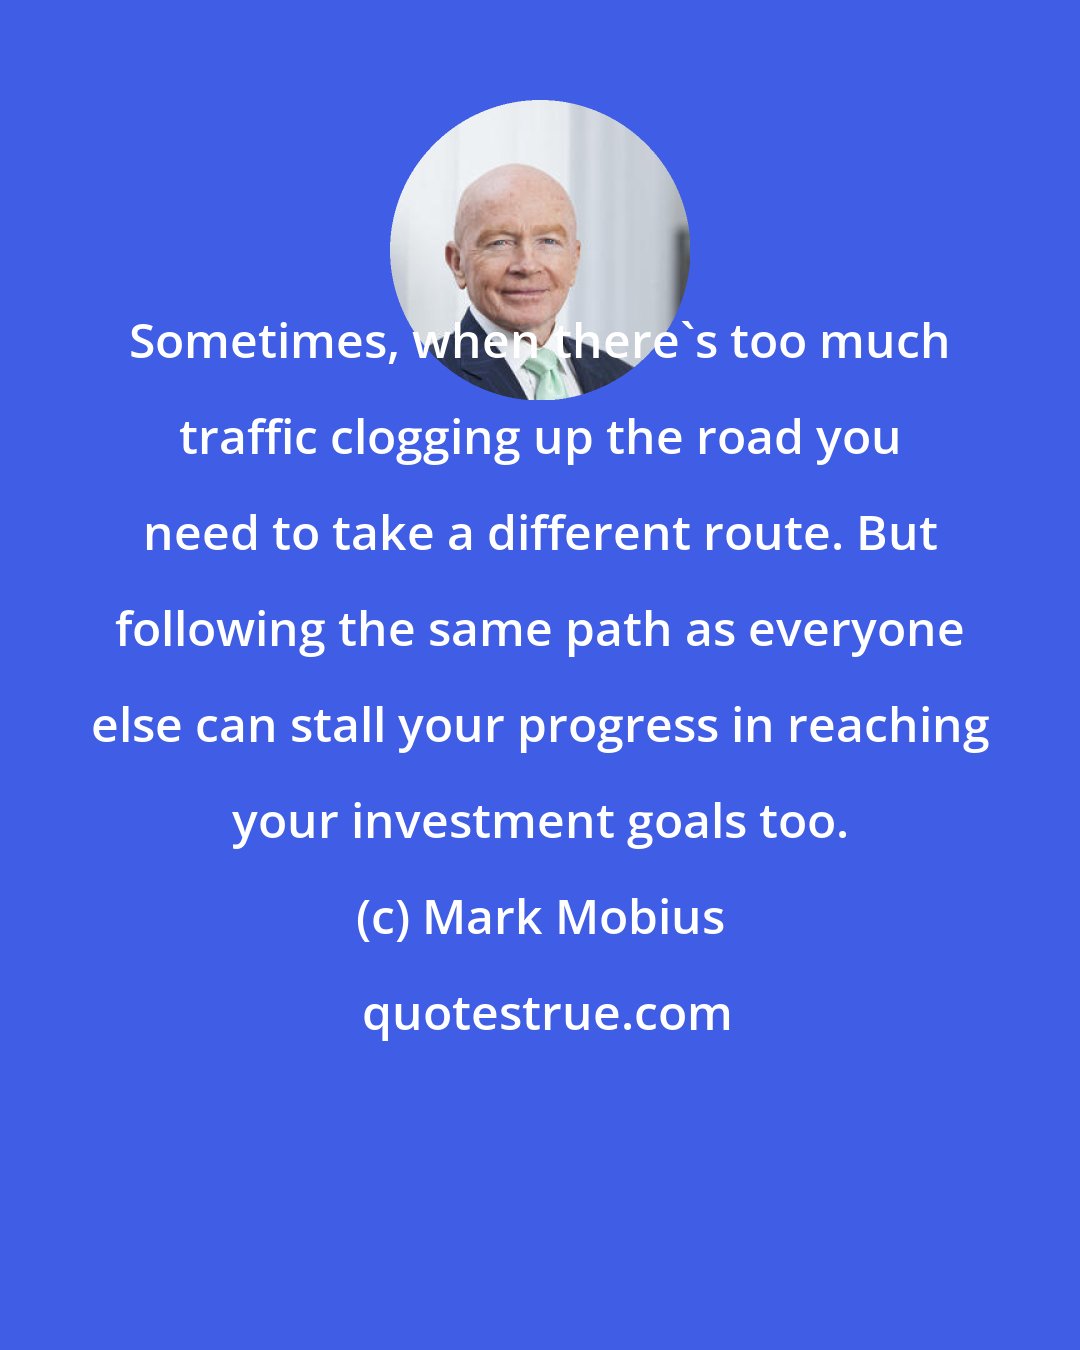 Mark Mobius: Sometimes, when there's too much traffic clogging up the road you need to take a different route. But following the same path as everyone else can stall your progress in reaching your investment goals too.